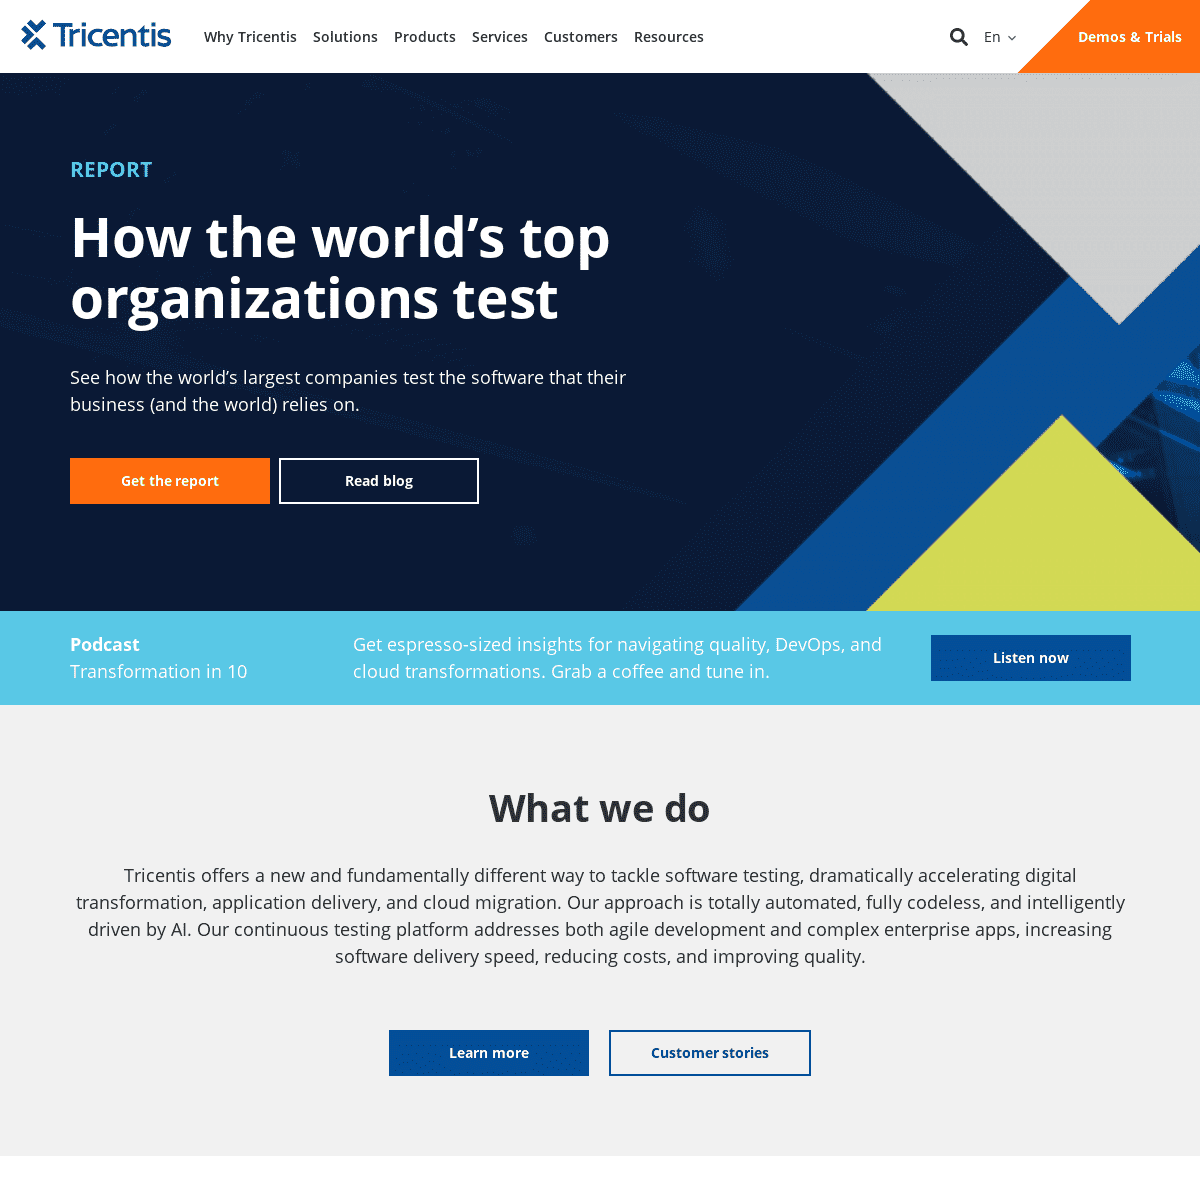 A complete backup of https://tricentis.com